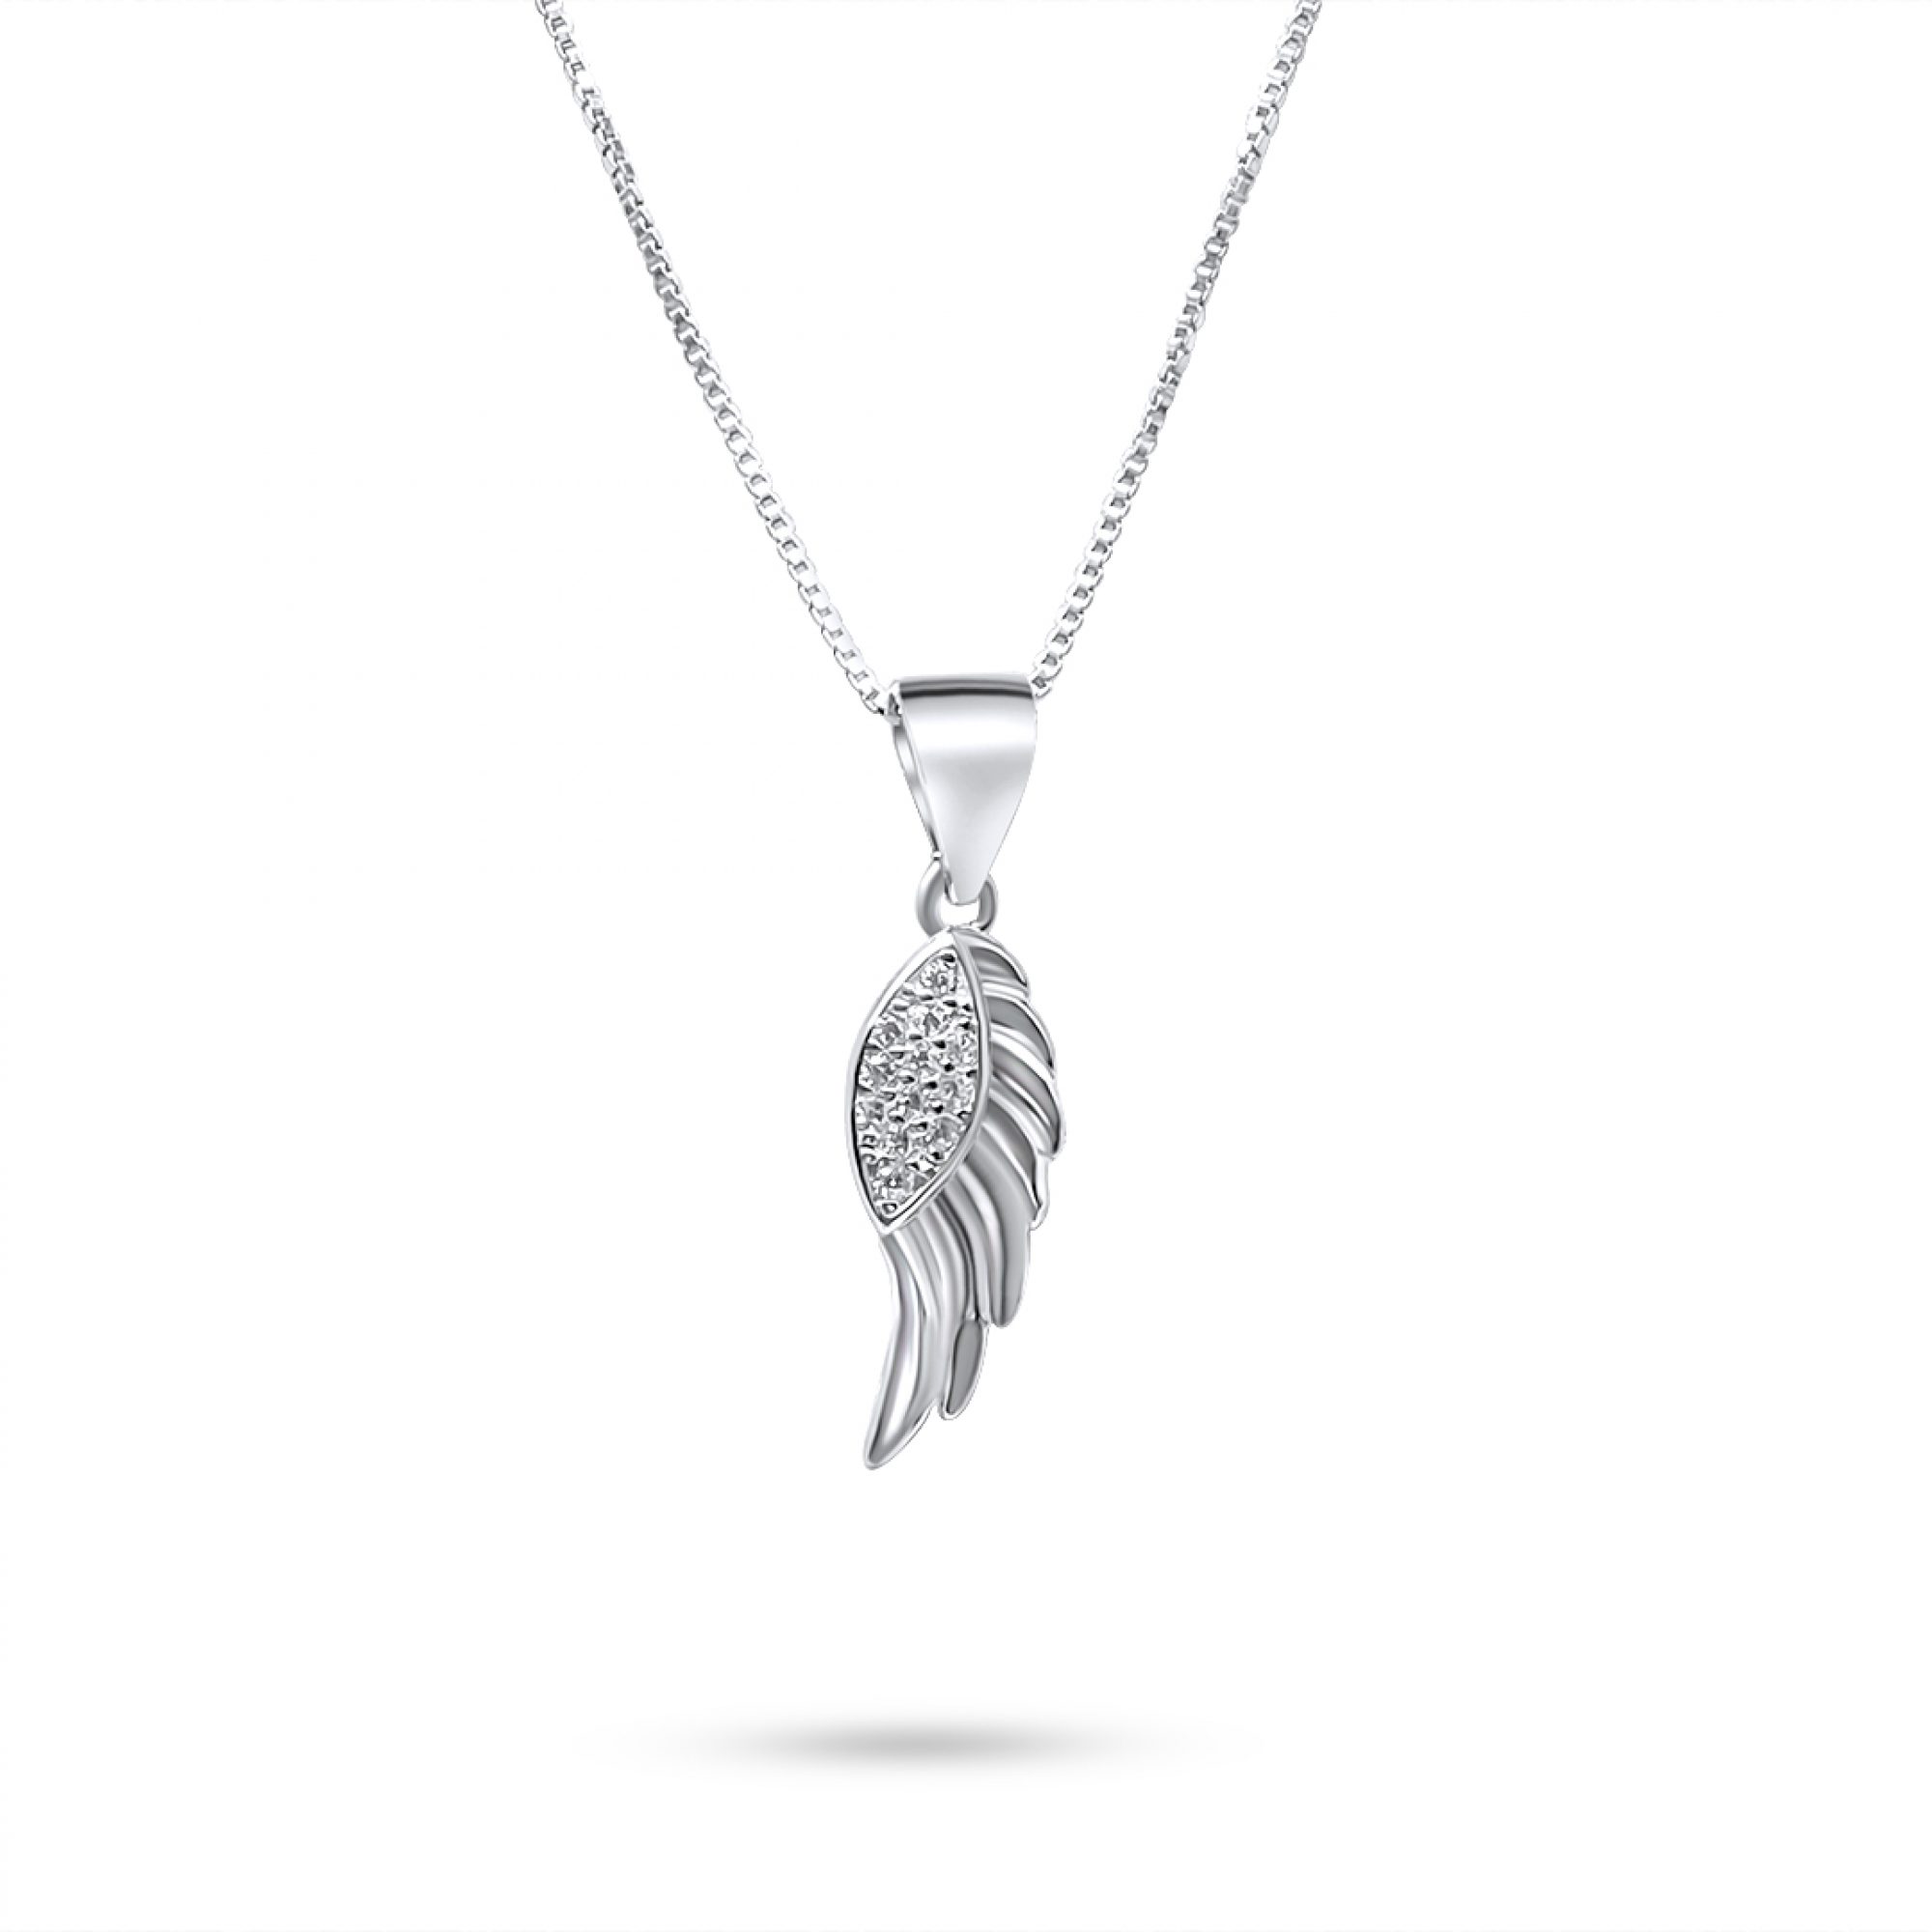 Angel wing necklace with zircon stones